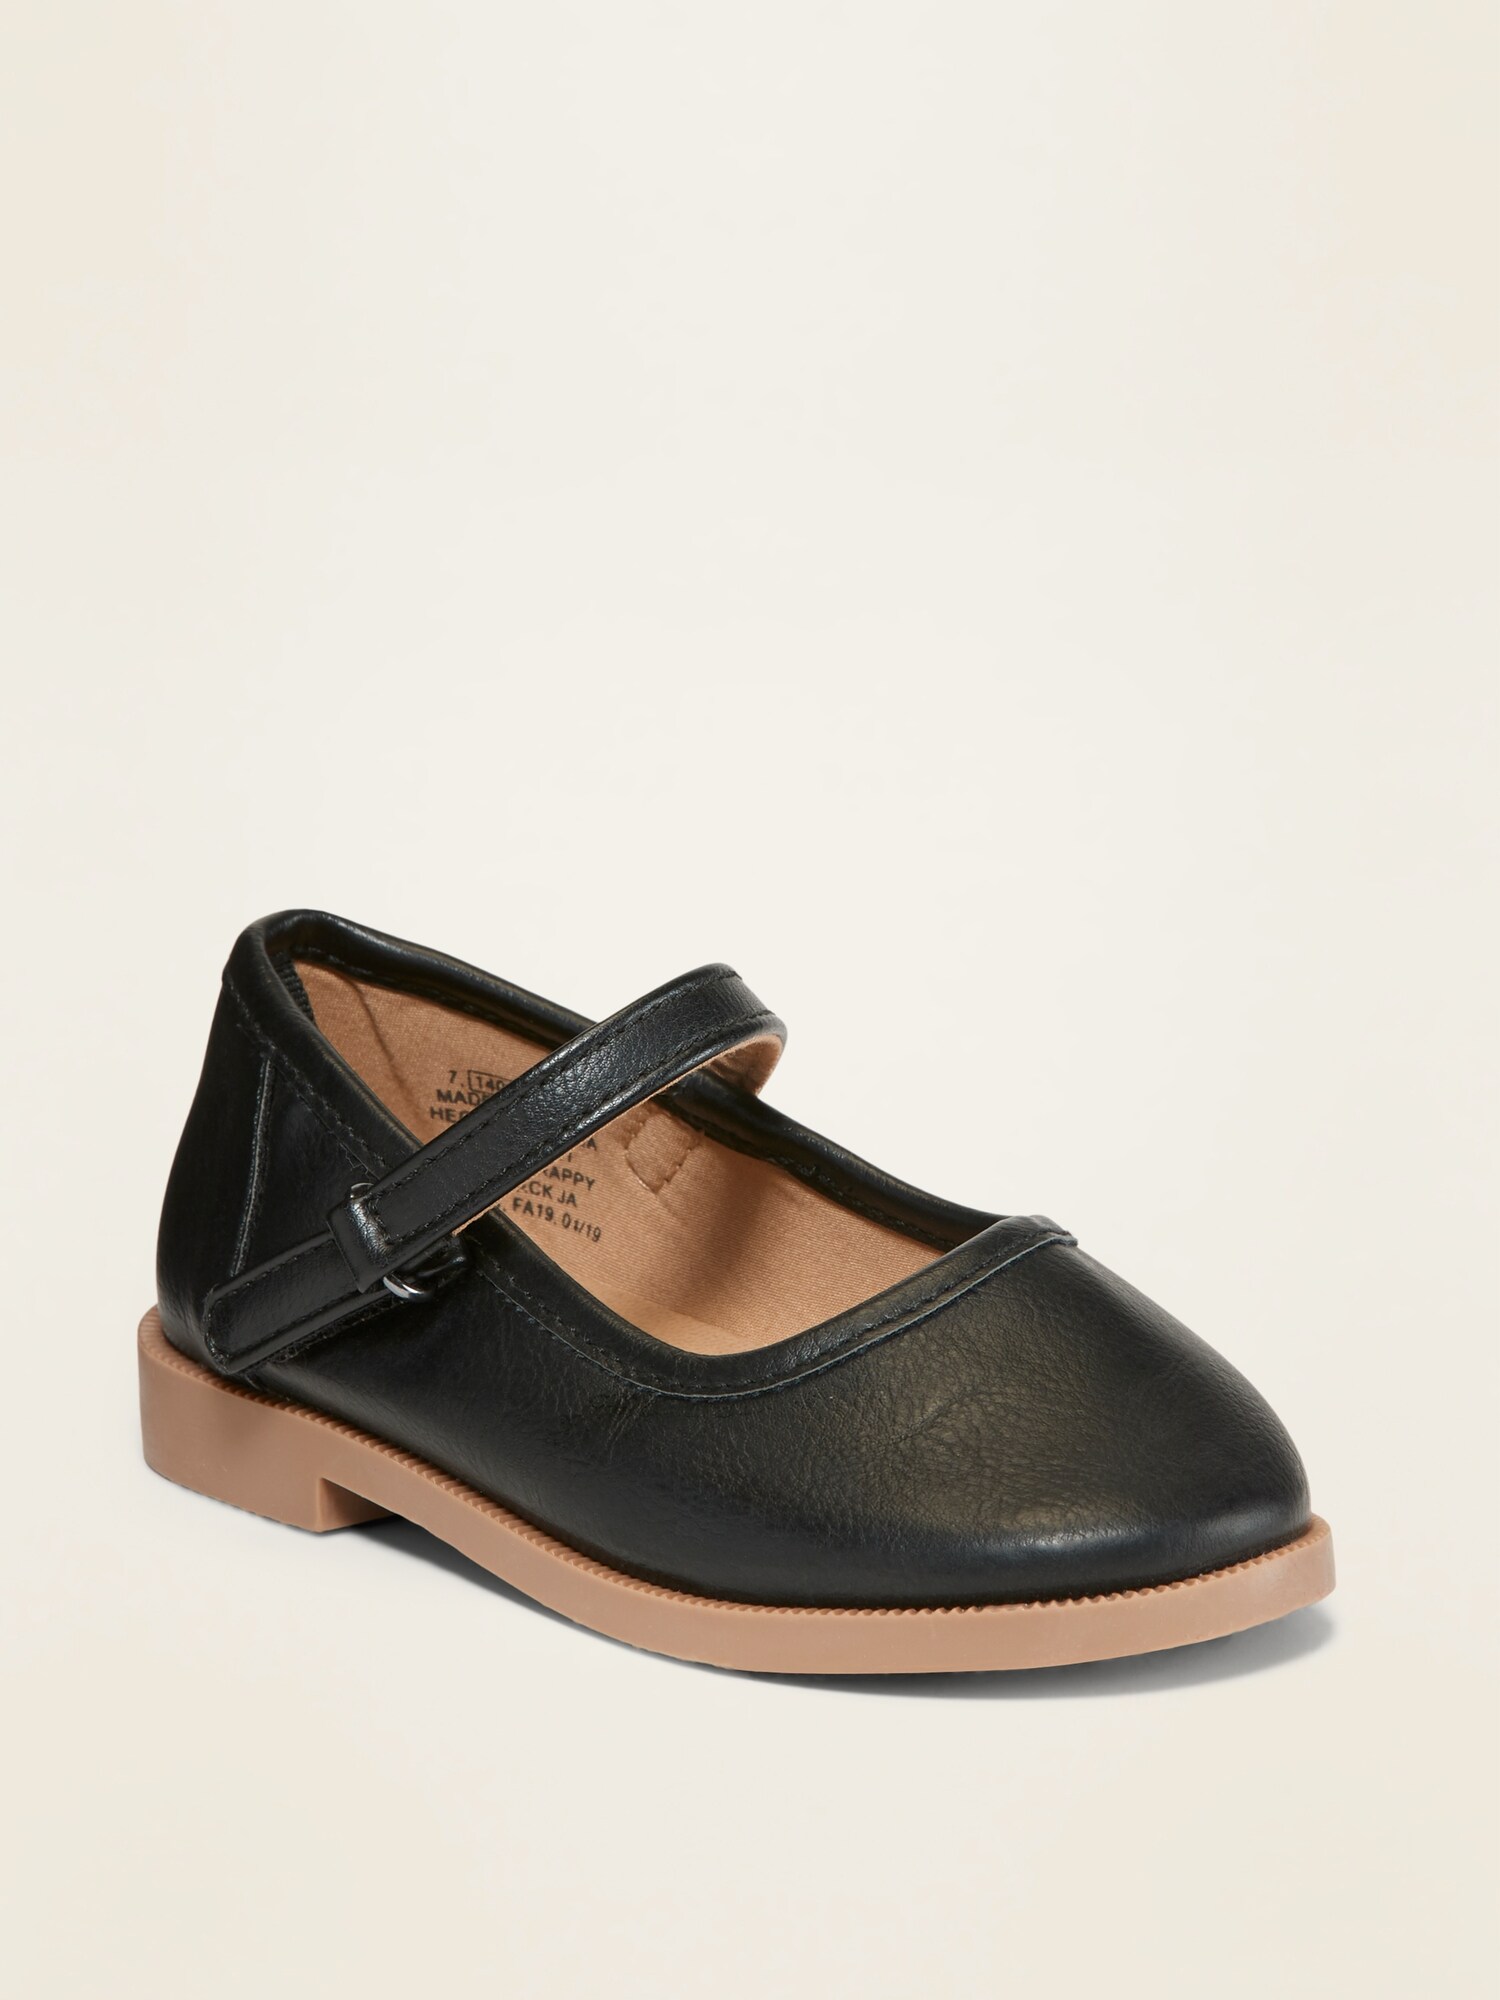 Faux-Leather Uniform Mary-Janes for 